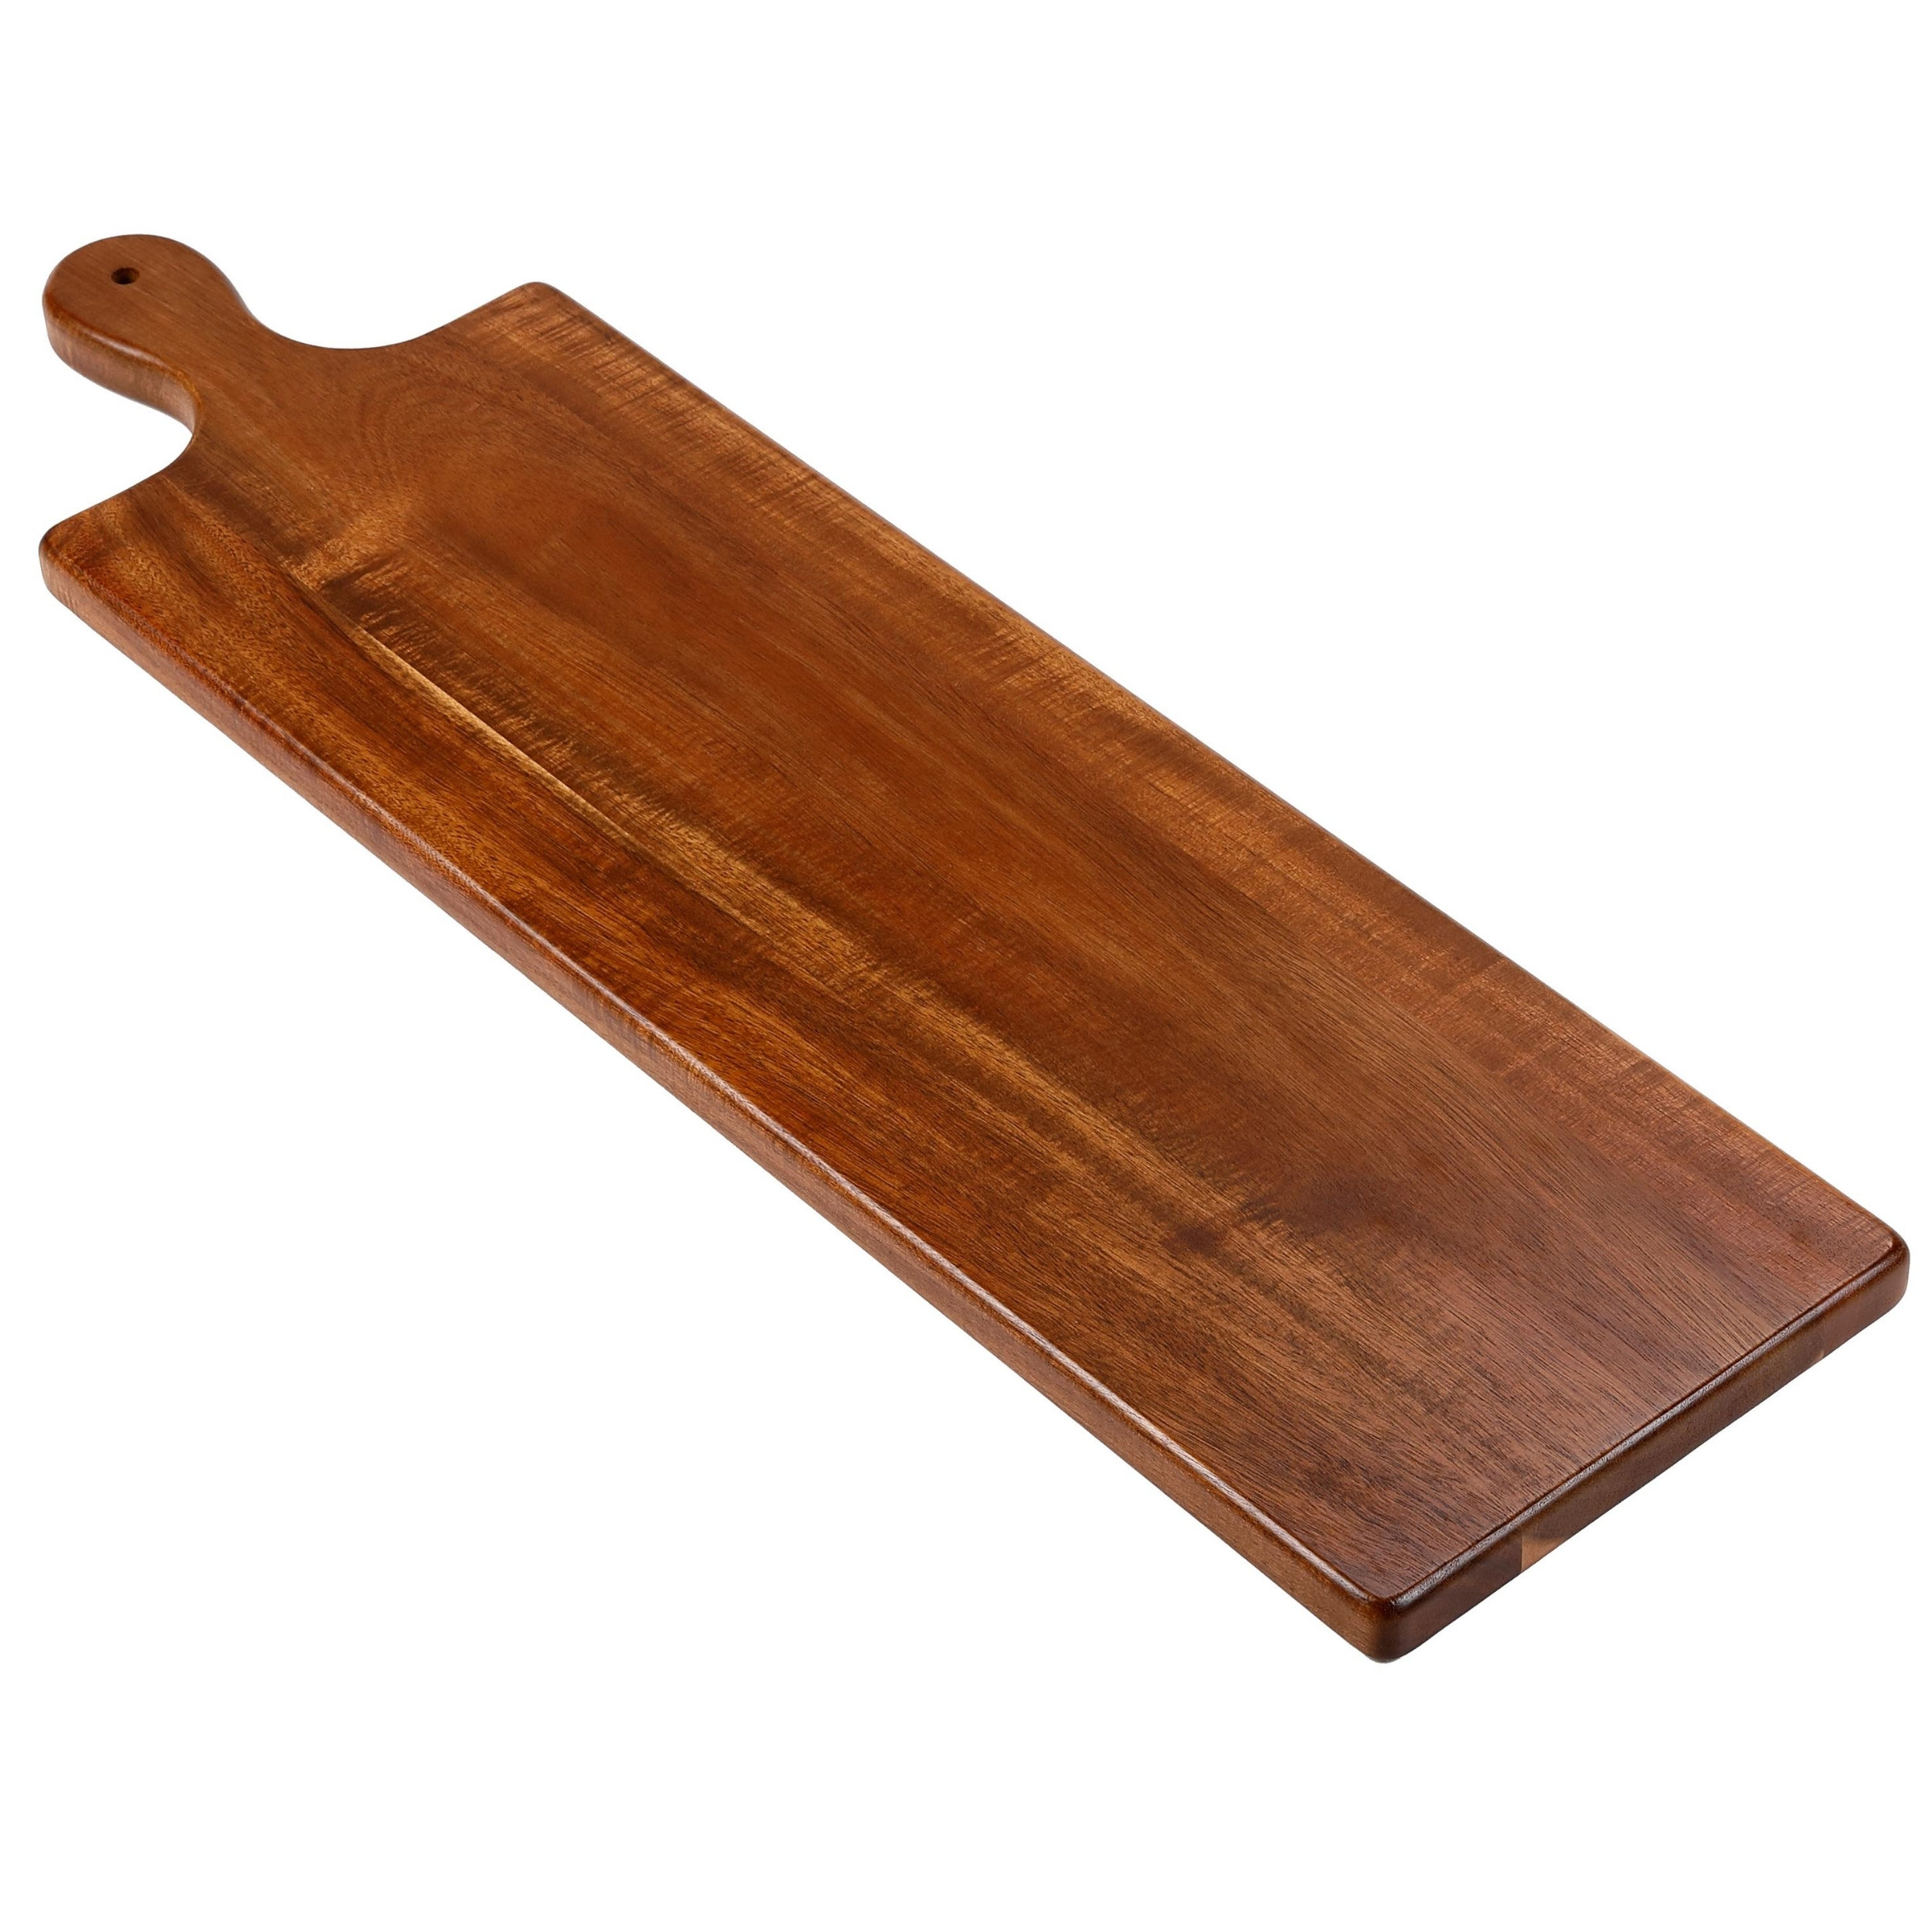  Large Acacia Wood Cutting Board with Containers for Kitchen  Simple Charcuterie Board Wooden Serving Cheese Board Meats Platter Dessert  Fruit Charcuterie Party Butcher Block Chopping Board: Home & Kitchen